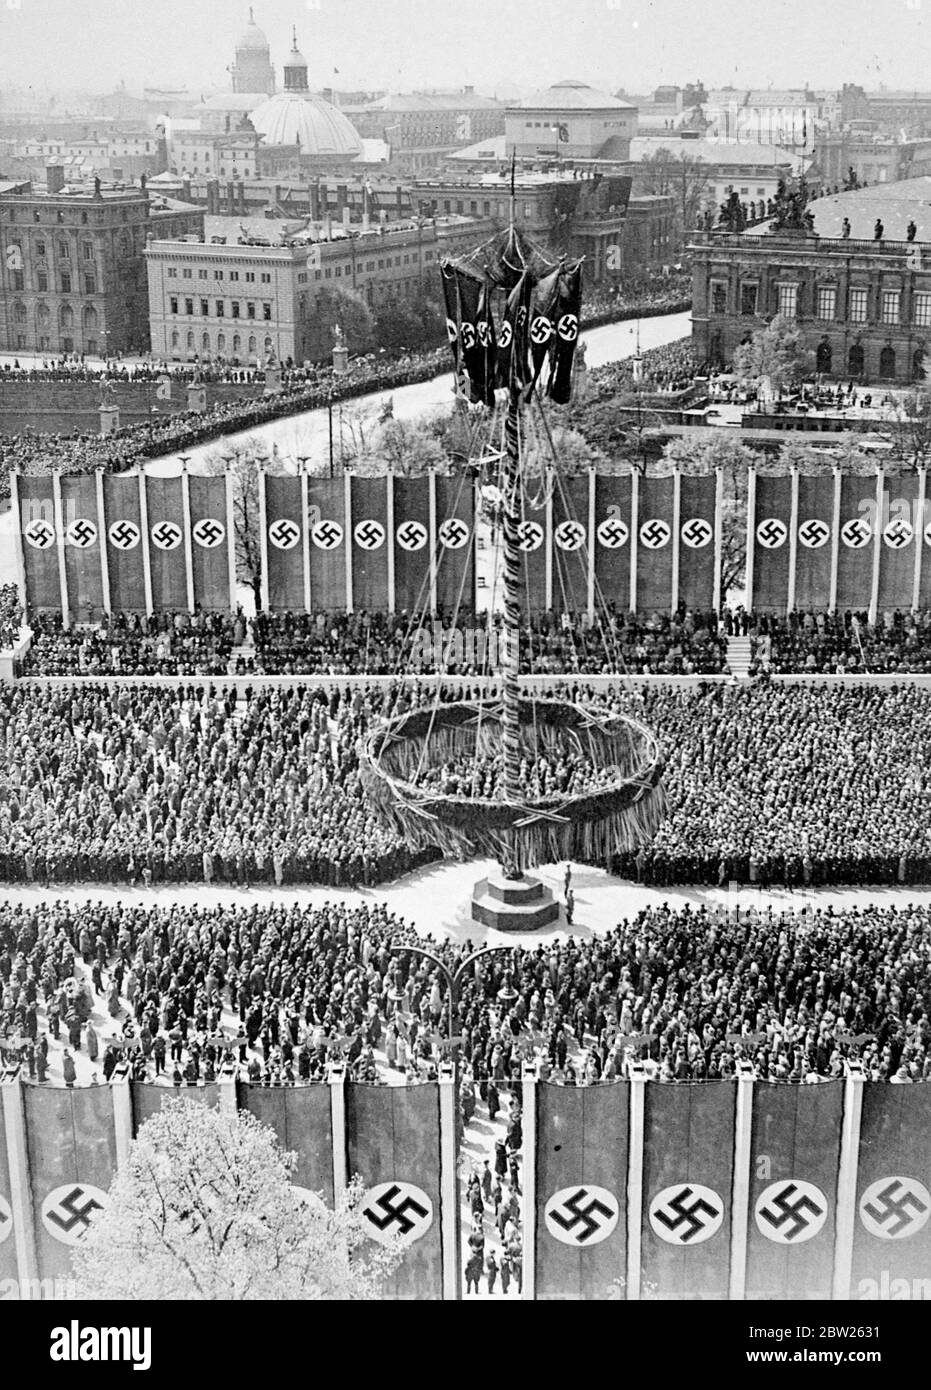 Thousands of workers gather around Maypole to hear Hitler's speech. The great crowd of workers gathered around a Maypole nearly 100 foot high, on the Berlin Lustgarten to hear the May Day speech by Herr Hitler. The Maypole have been specially sent from Austria. In his speech Hitler complained about Germany's 'lack of space' and claimed that Germany was far ahead of democracies in achievement. 2 May 1938 Stock Photo